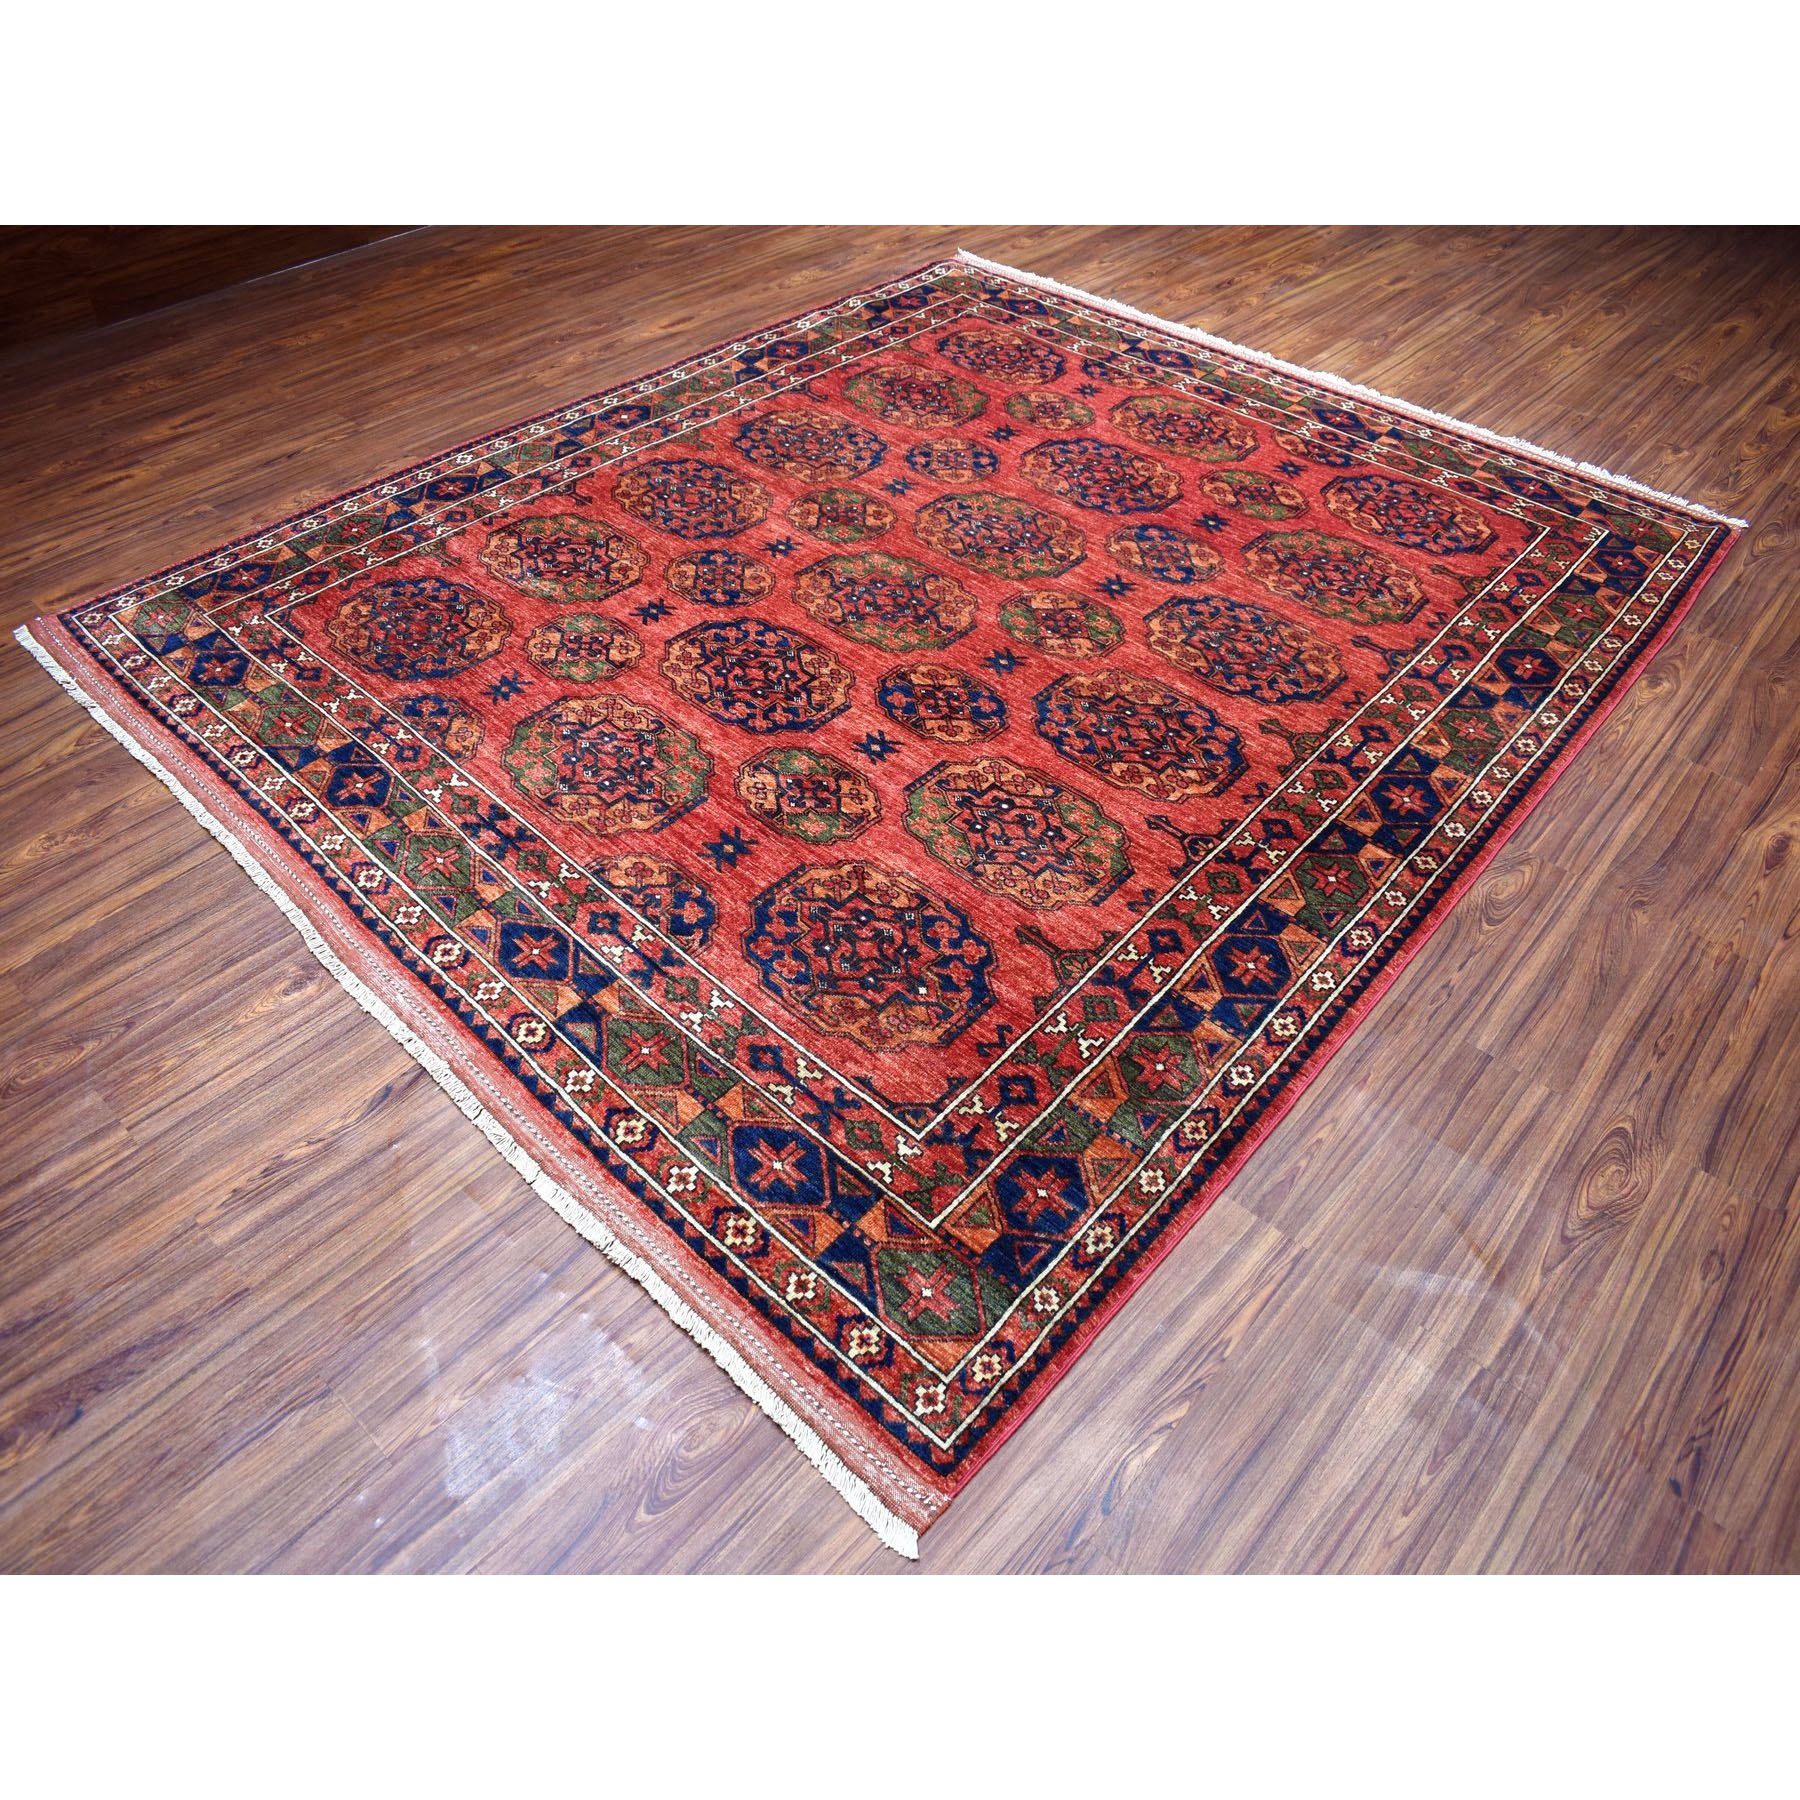 8-2 x9-4  Afghan Ersari Elephant Feet Design Soft Pile Natural Dyes Hand Knotted Pure Wool Oriental Rug 